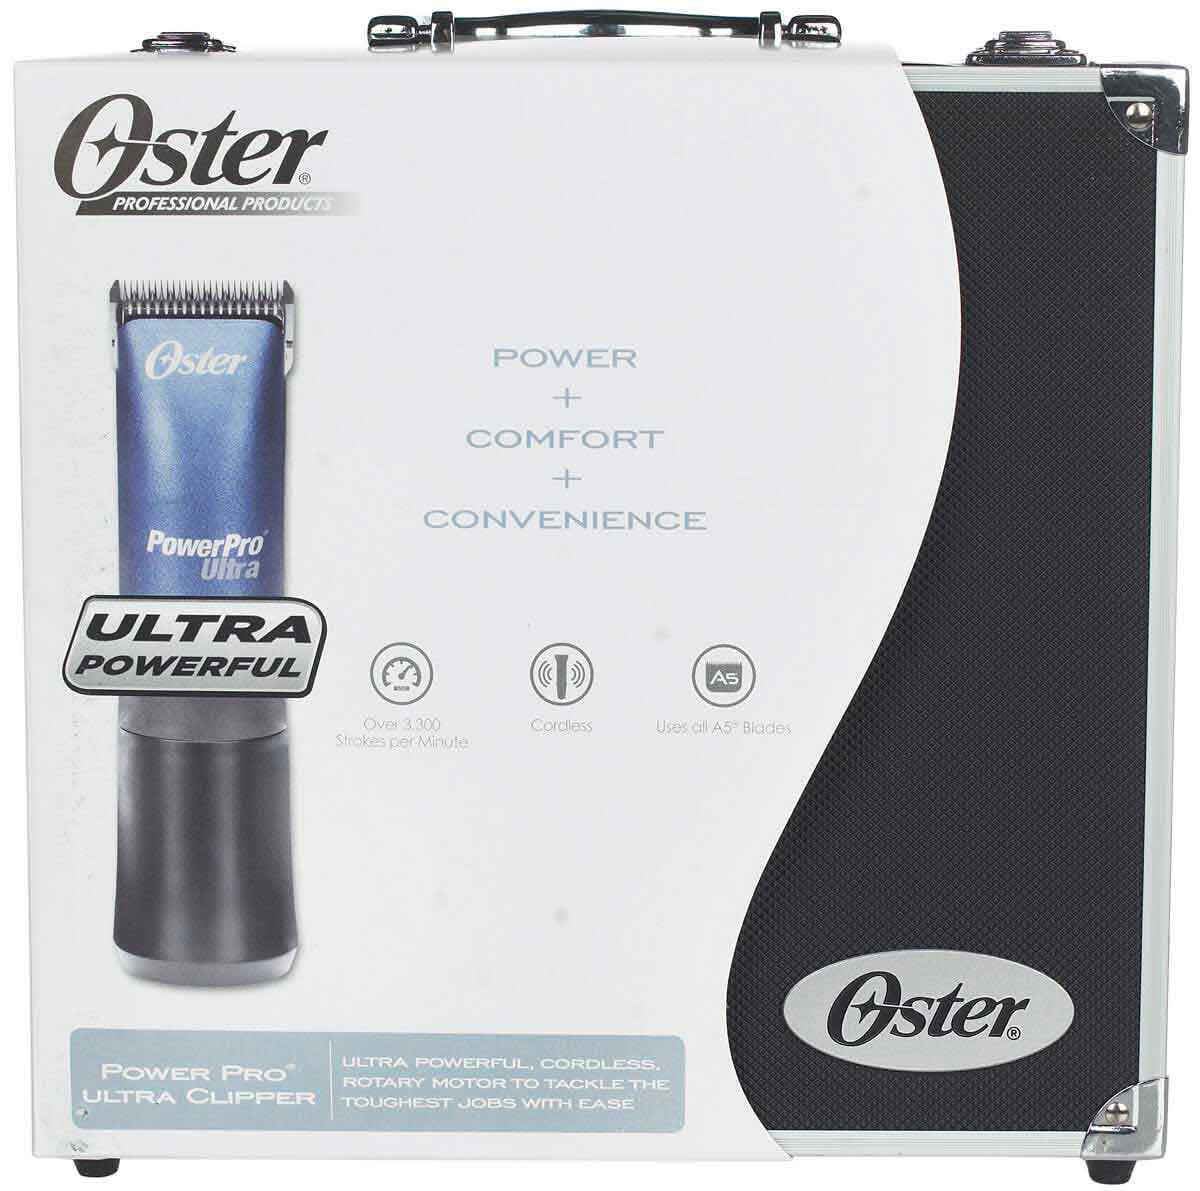 oster power pro cordless clippers battery